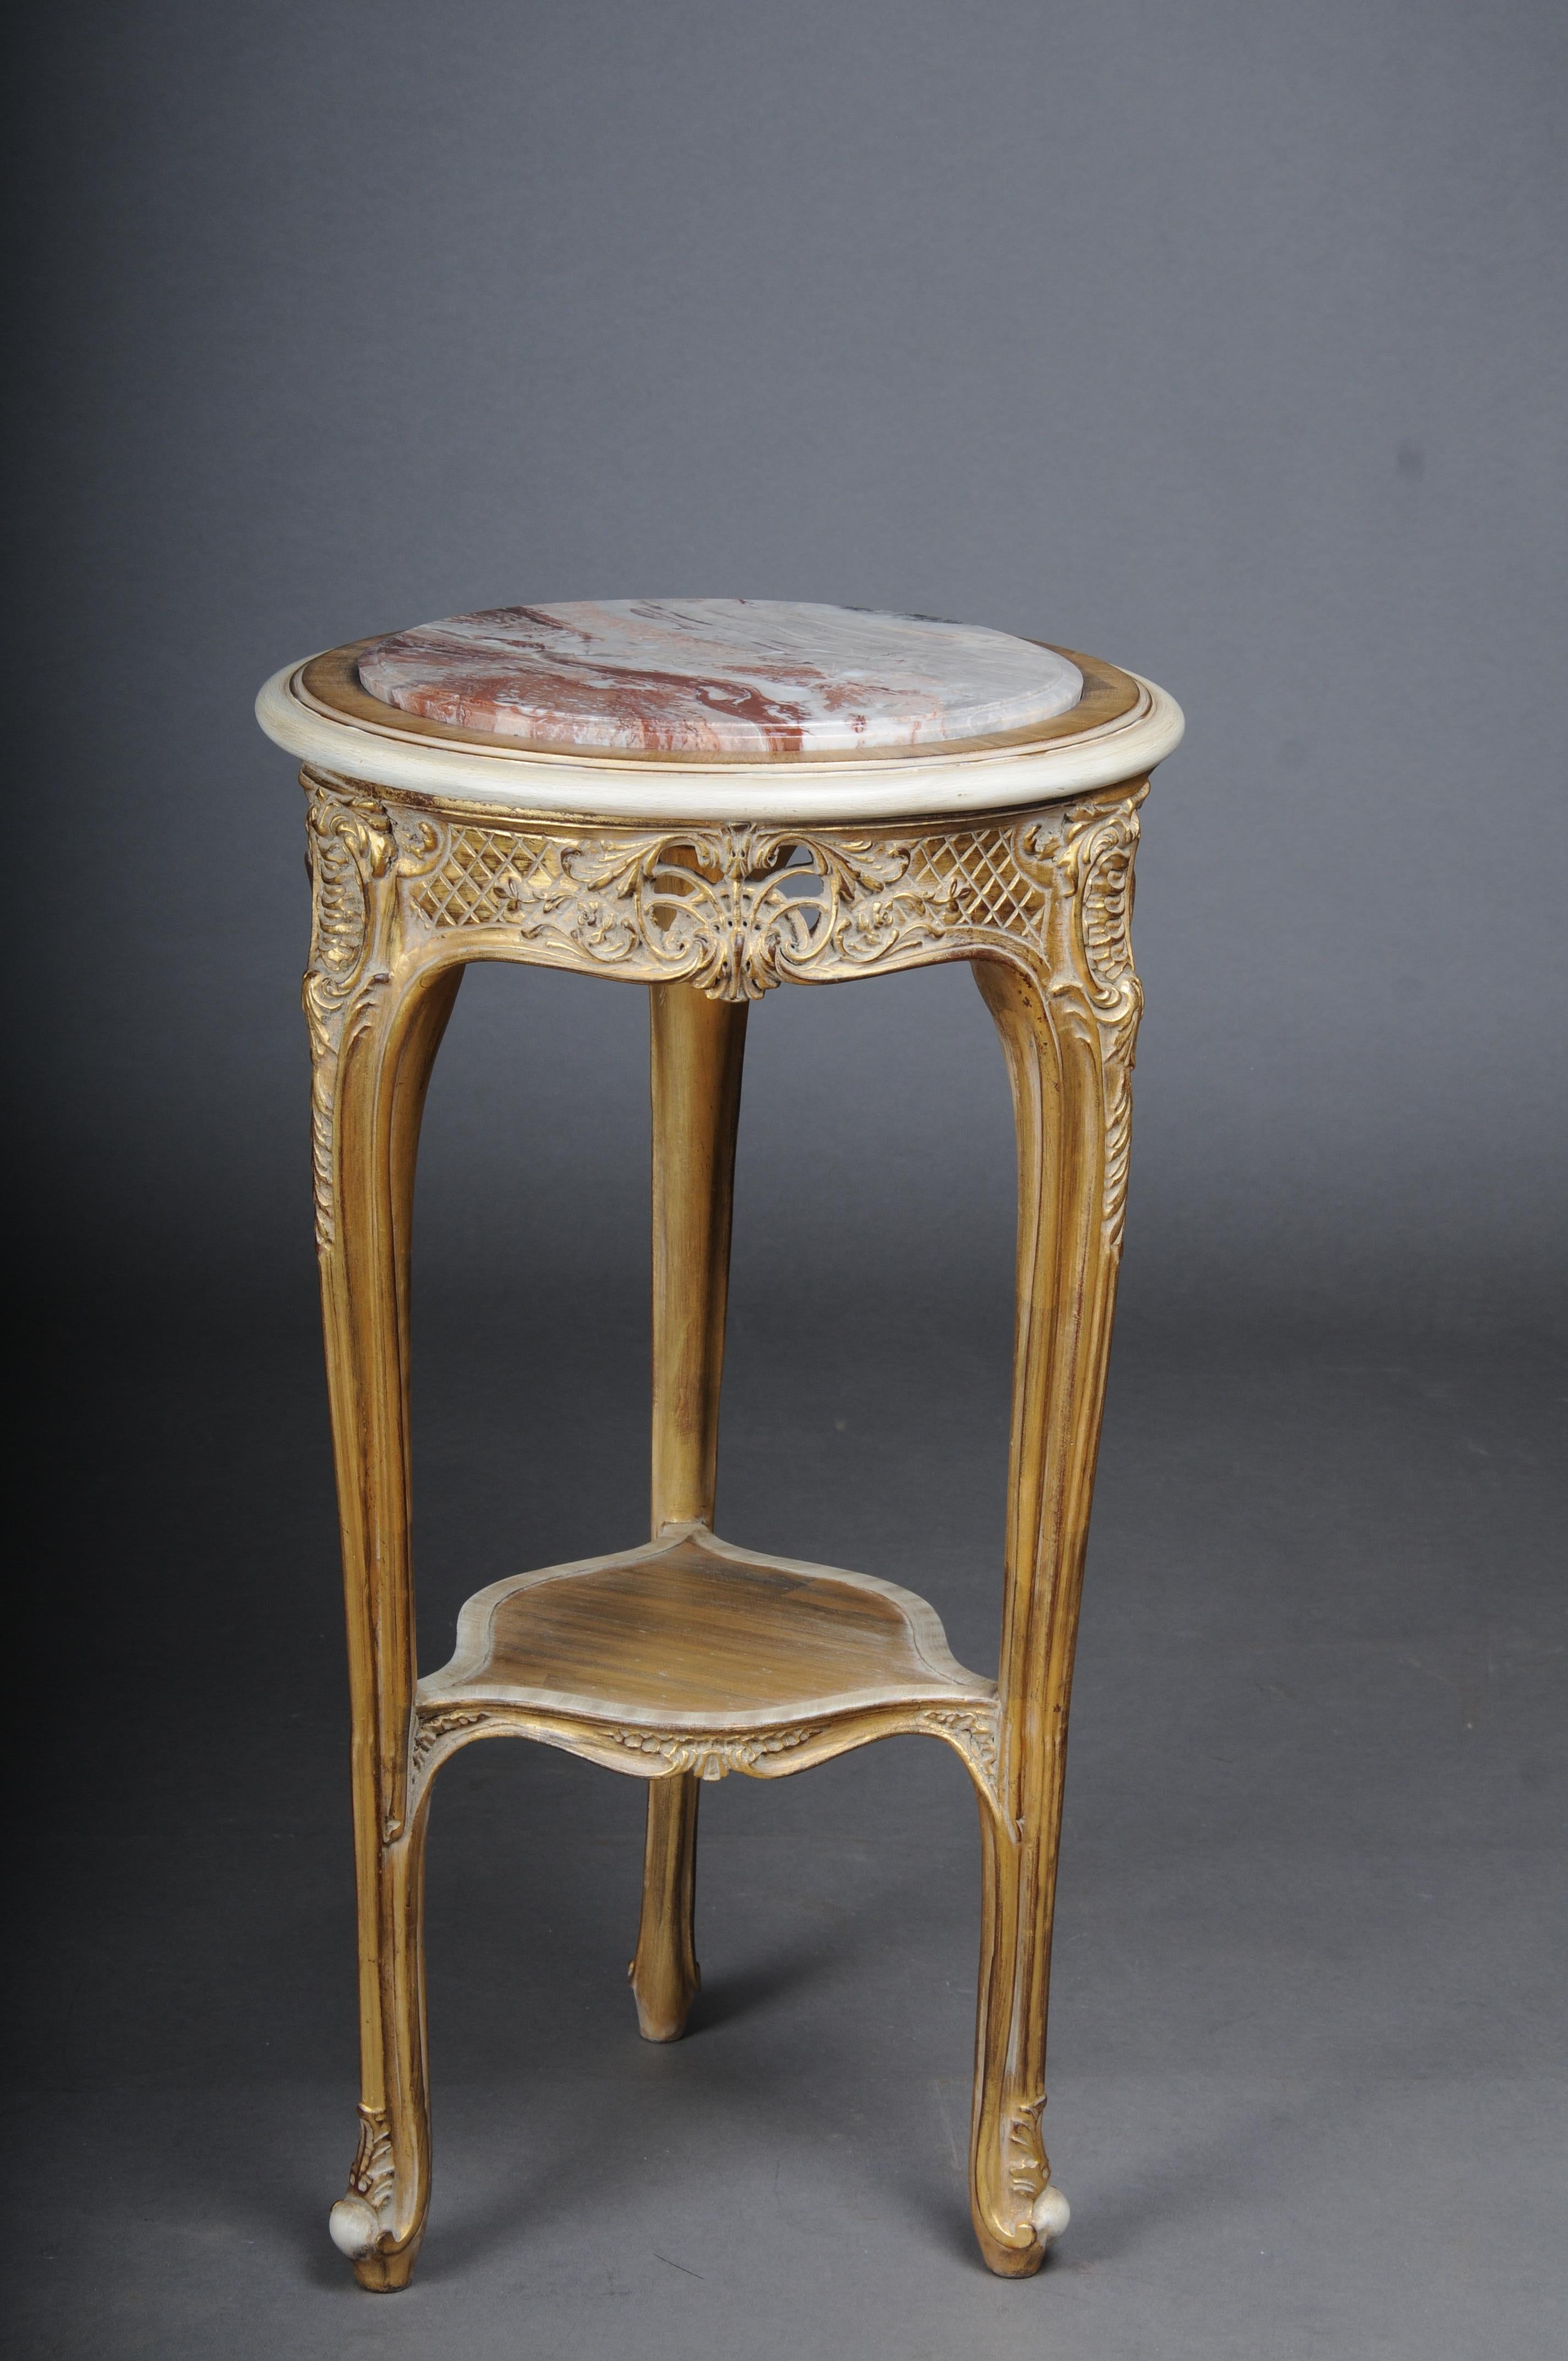 Finely carved gold side table with marble top, Louis XV white/gold

Excellent French Louis XV style table.
High-quality, solid beech wood, carved down to the smallest detail. Extremely decorative and noble. Round inserted and profiled marble slab